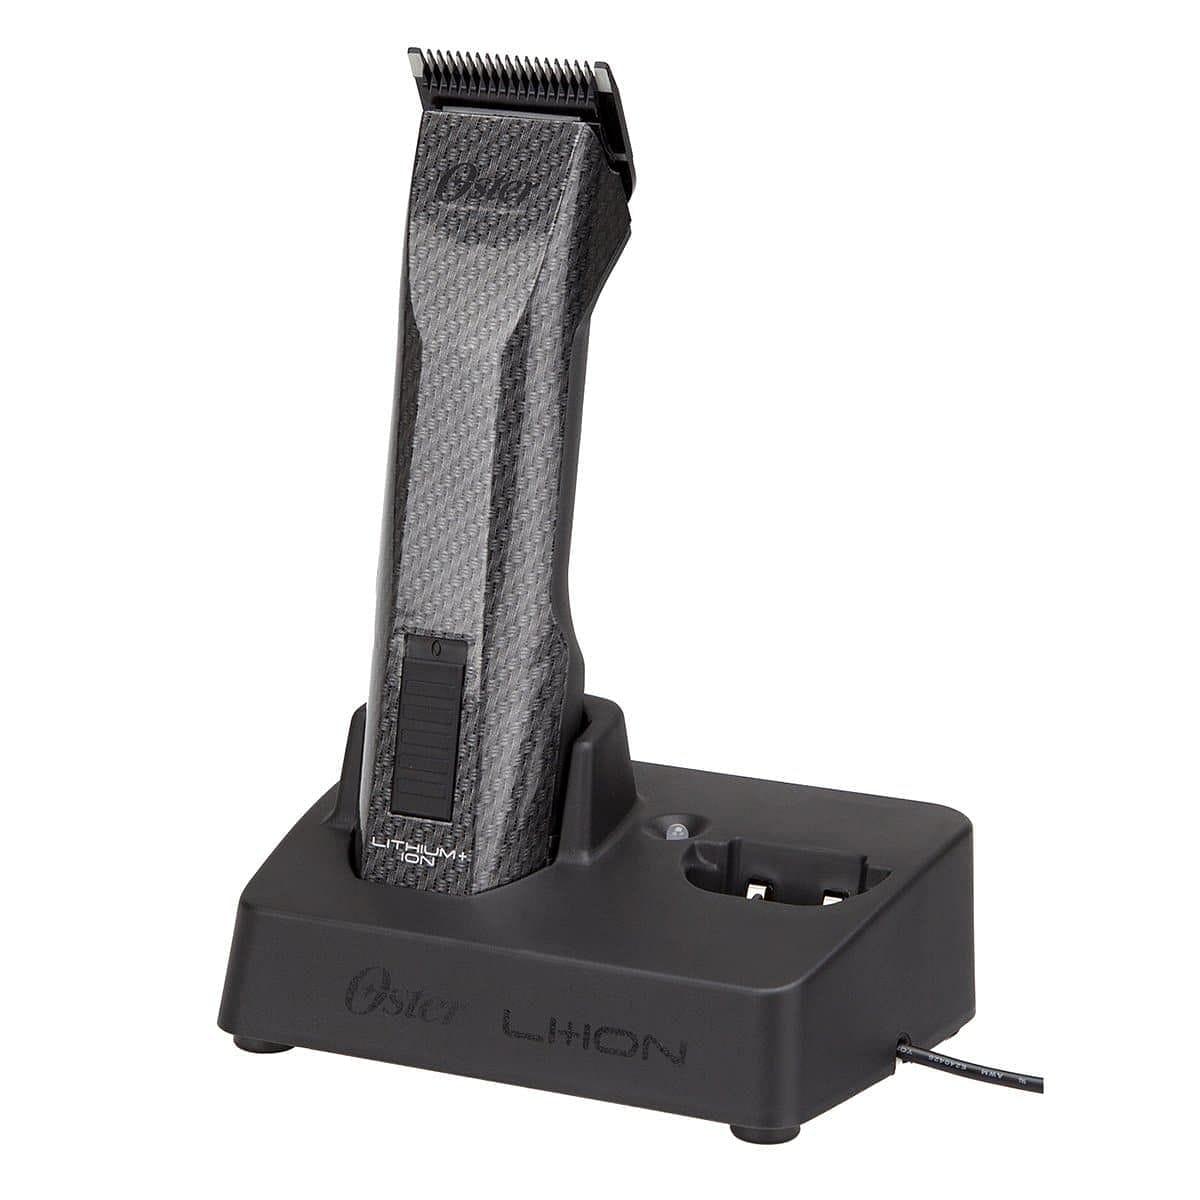 Oster Octane Lithium Ion Powered Heavy Duty Cordless Hair Clipper with Detachable Blades #76550-100 - Goldy TV